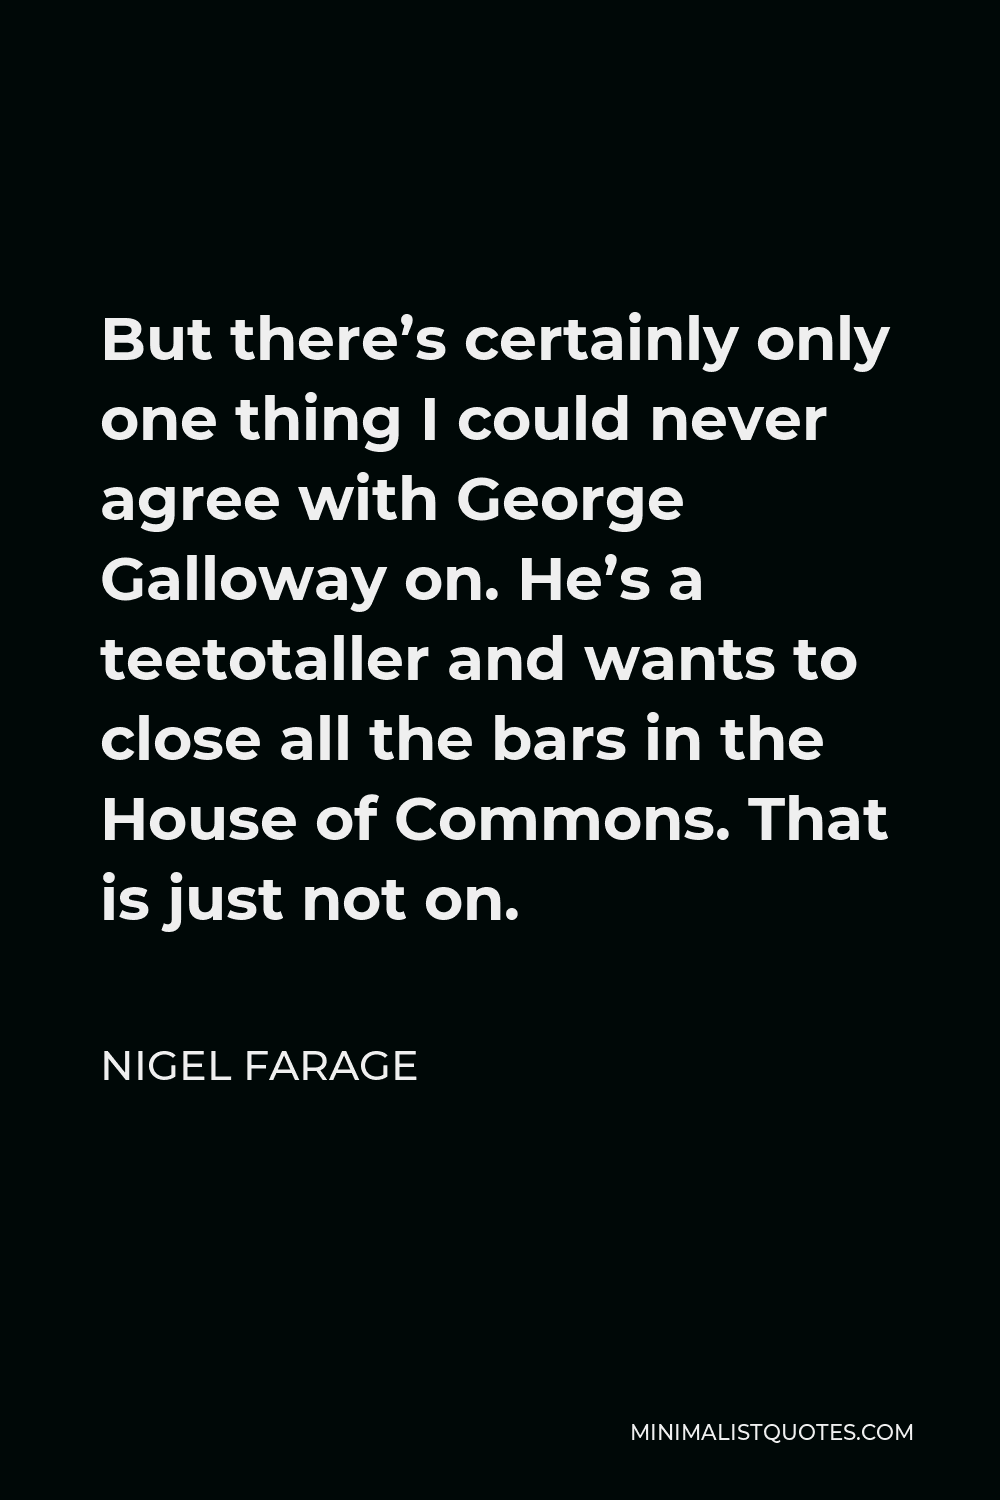 Nigel Farage Quote - But there’s certainly only one thing I could never agree with George Galloway on. He’s a teetotaller and wants to close all the bars in the House of Commons. That is just not on.